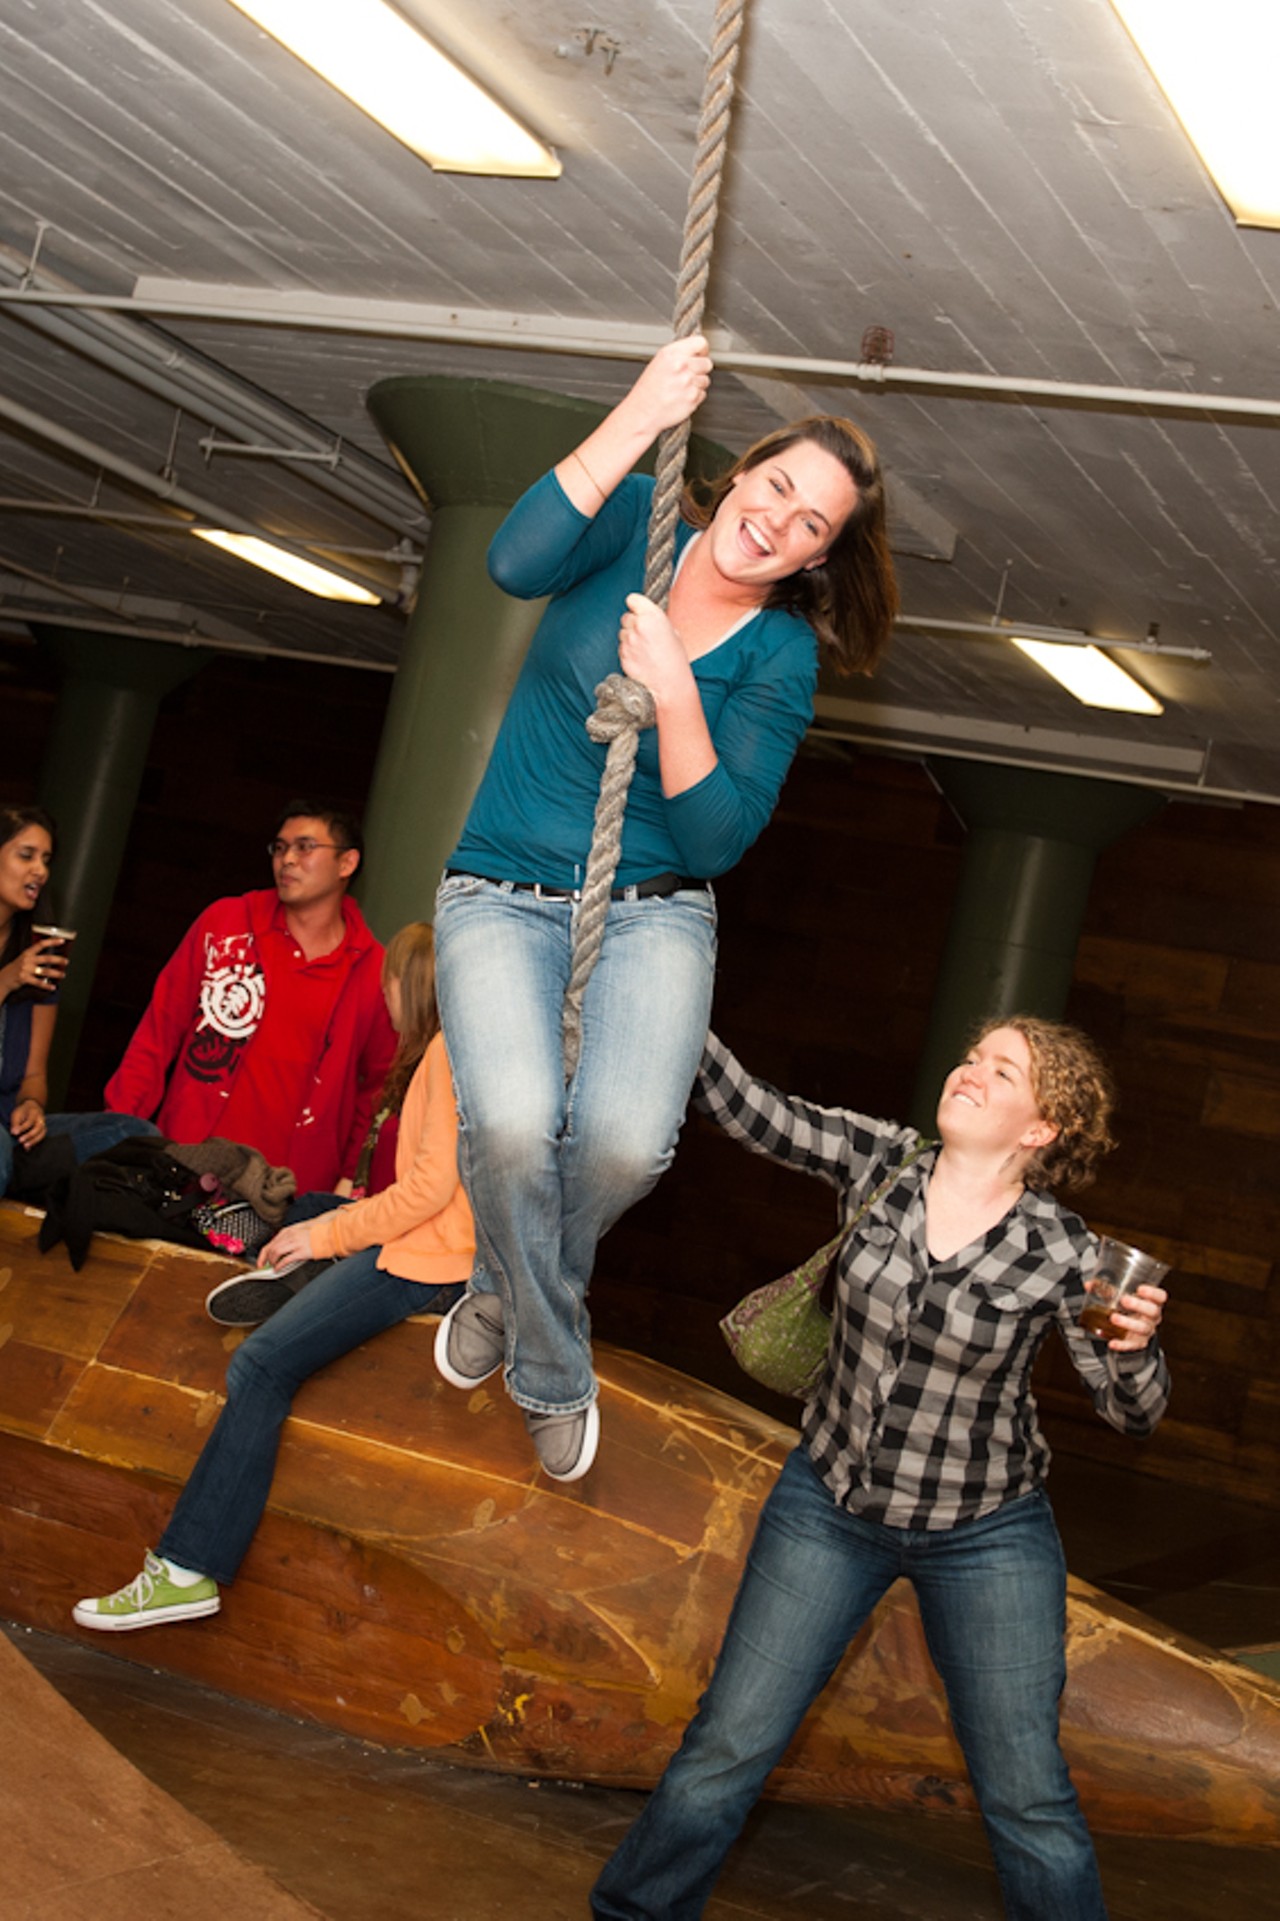 A RFT party attendee gets a helpful nudge from a friend while swinging from a rope at the City Museum.